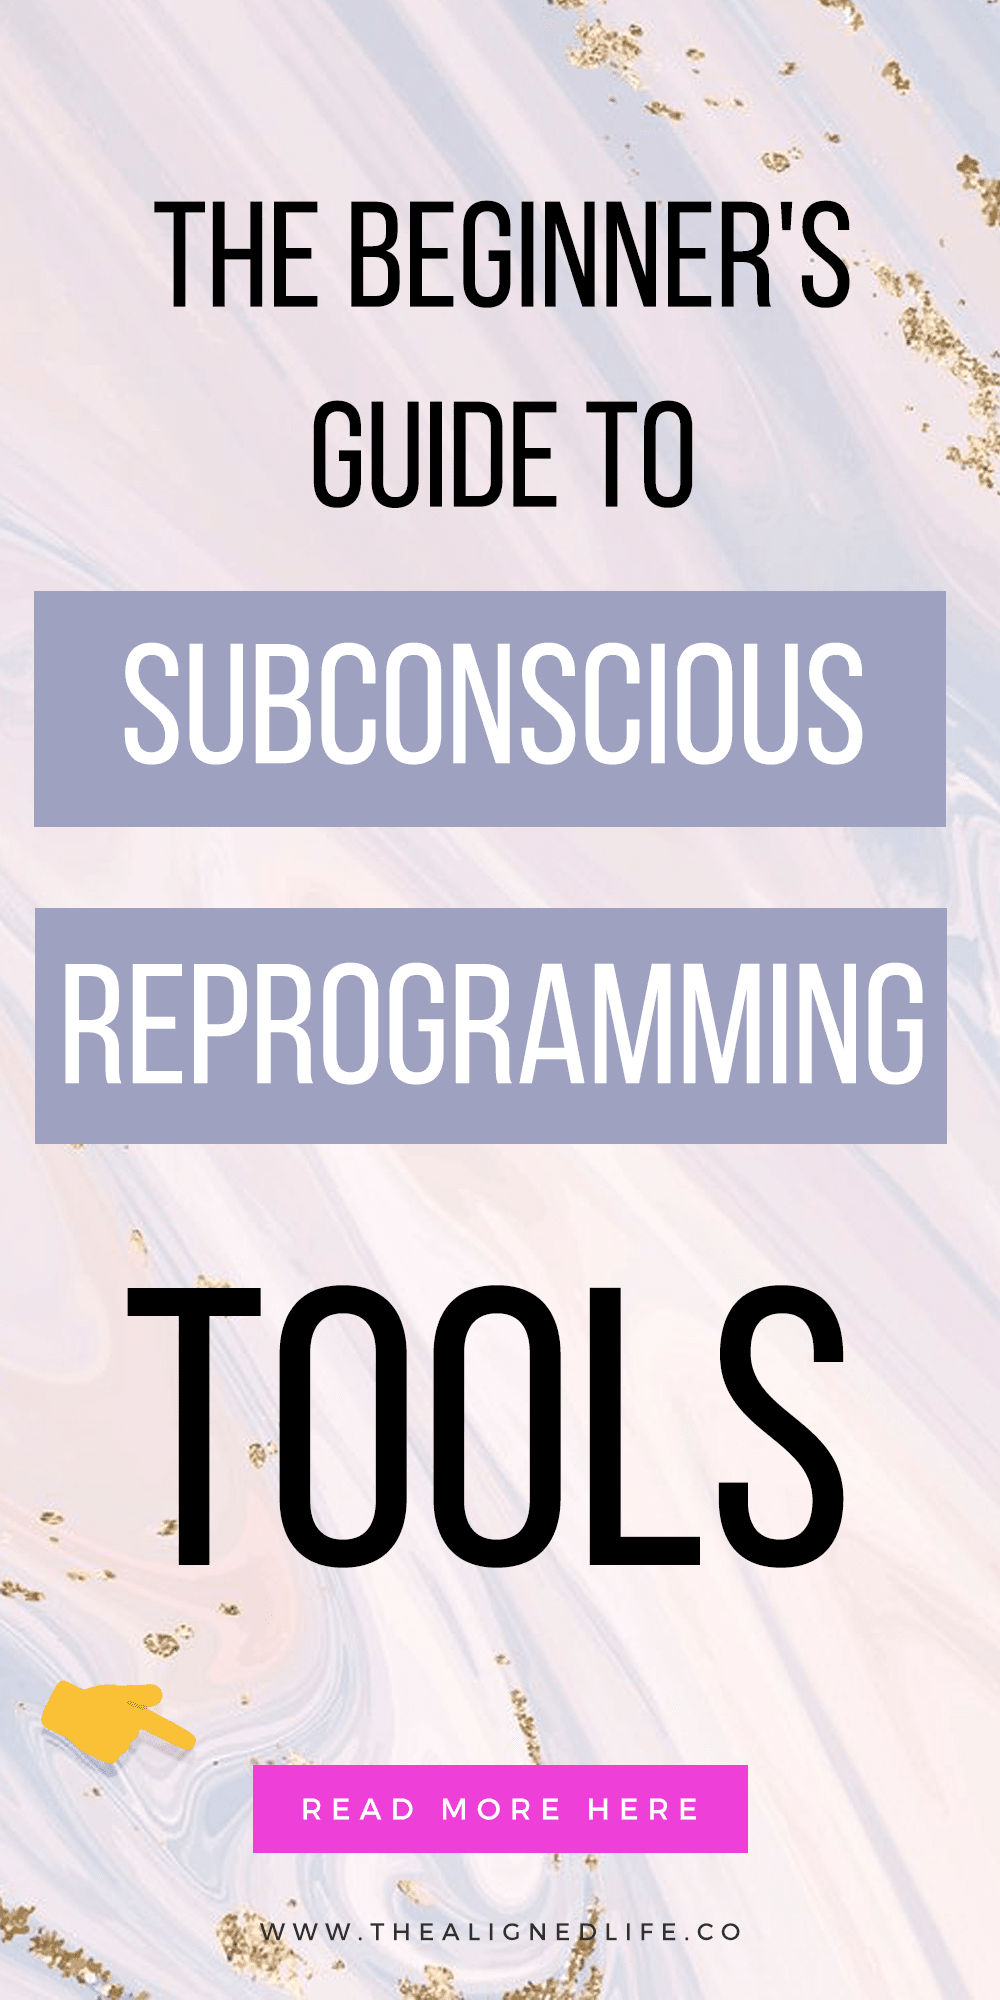 marble background with text that reads The Beginner's Guide To Subconscious Reprogramming Tools